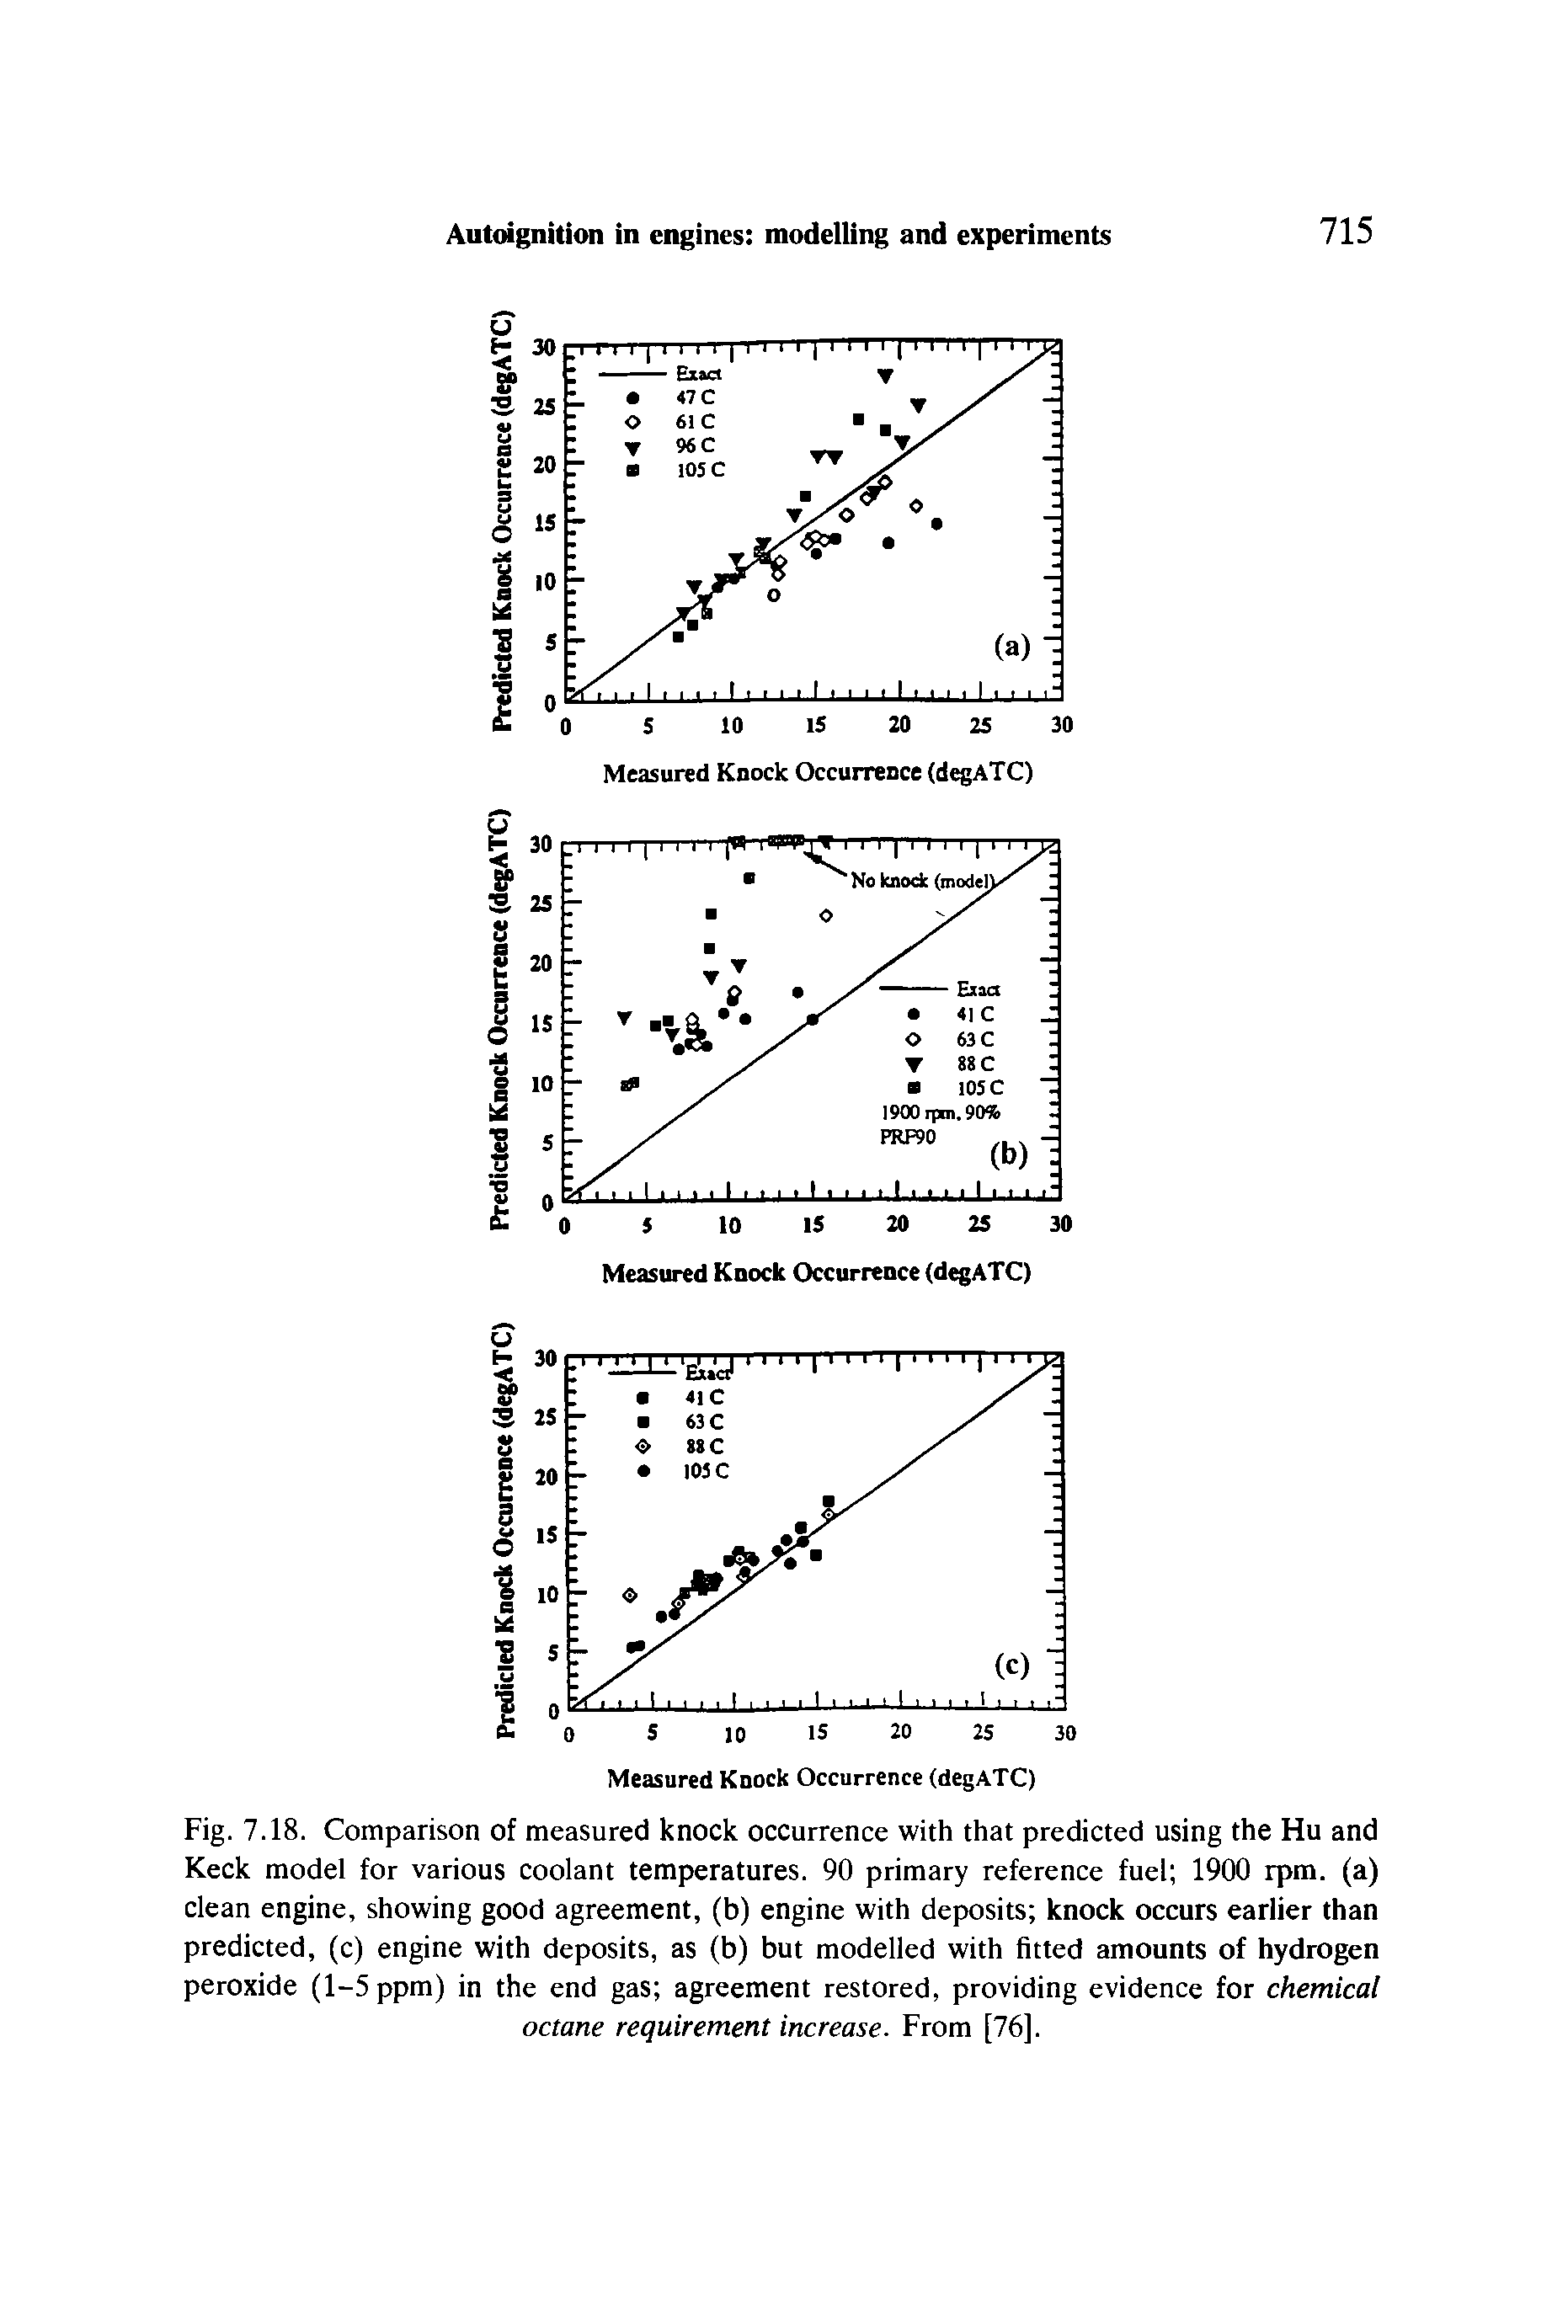 Fig. 7.18. Comparison of measured knock occurrence with that predicted using the Hu and Keck model for various coolant temperatures. 90 primary reference fuel 1900 rpm. (a) clean engine, showing good agreement, (b) engine with deposits knock occurs earlier than predicted, (c) engine with deposits, as (b) but modelled with fitted amounts of hydrogen peroxide (1-5 ppm) in the end gas agreement restored, providing evidence for chemical octane requirement increase. From [76].